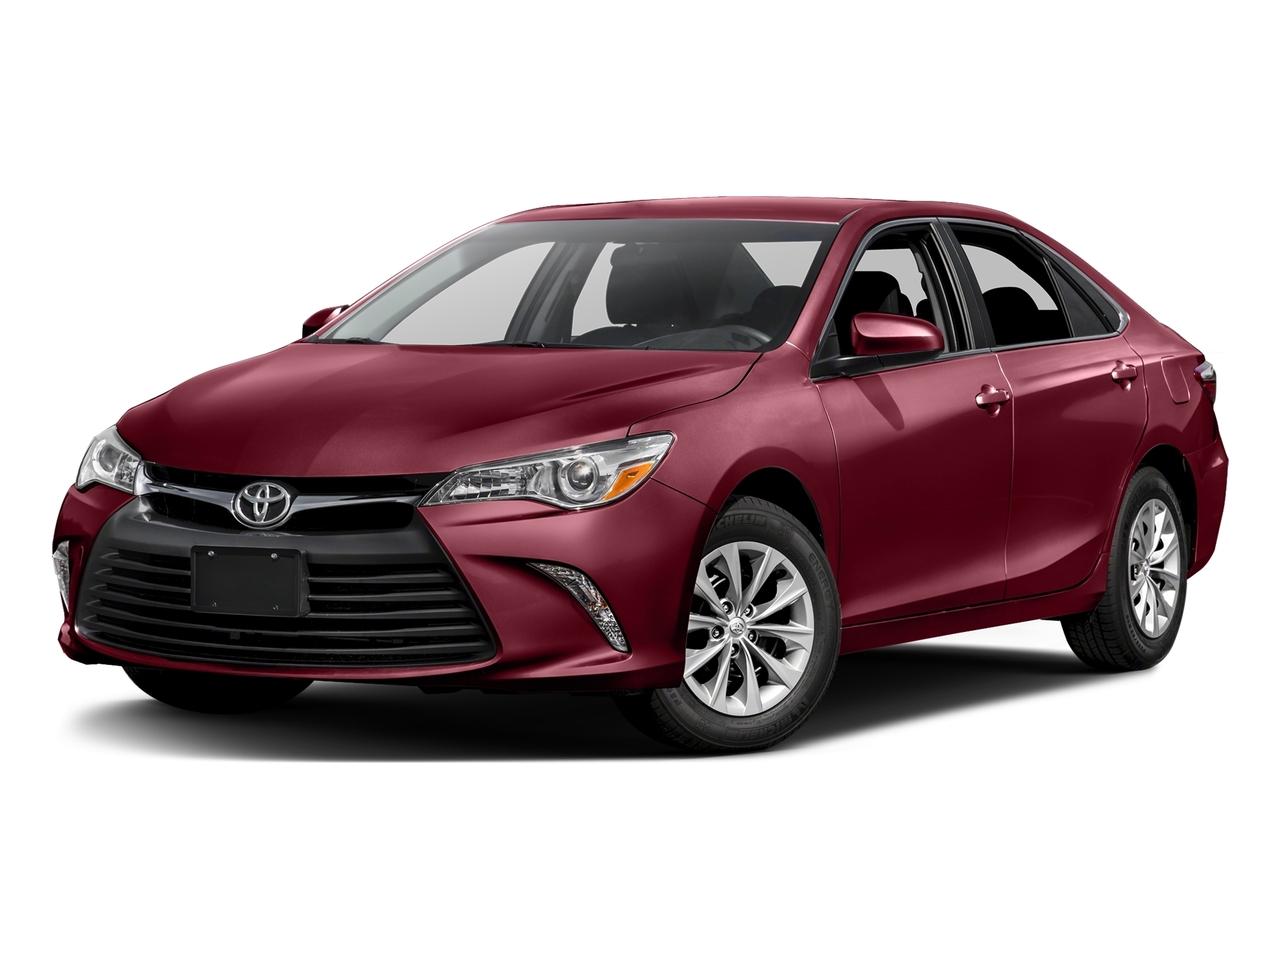 2016 Toyota Camry Vehicle Photo in Pinellas Park , FL 33781